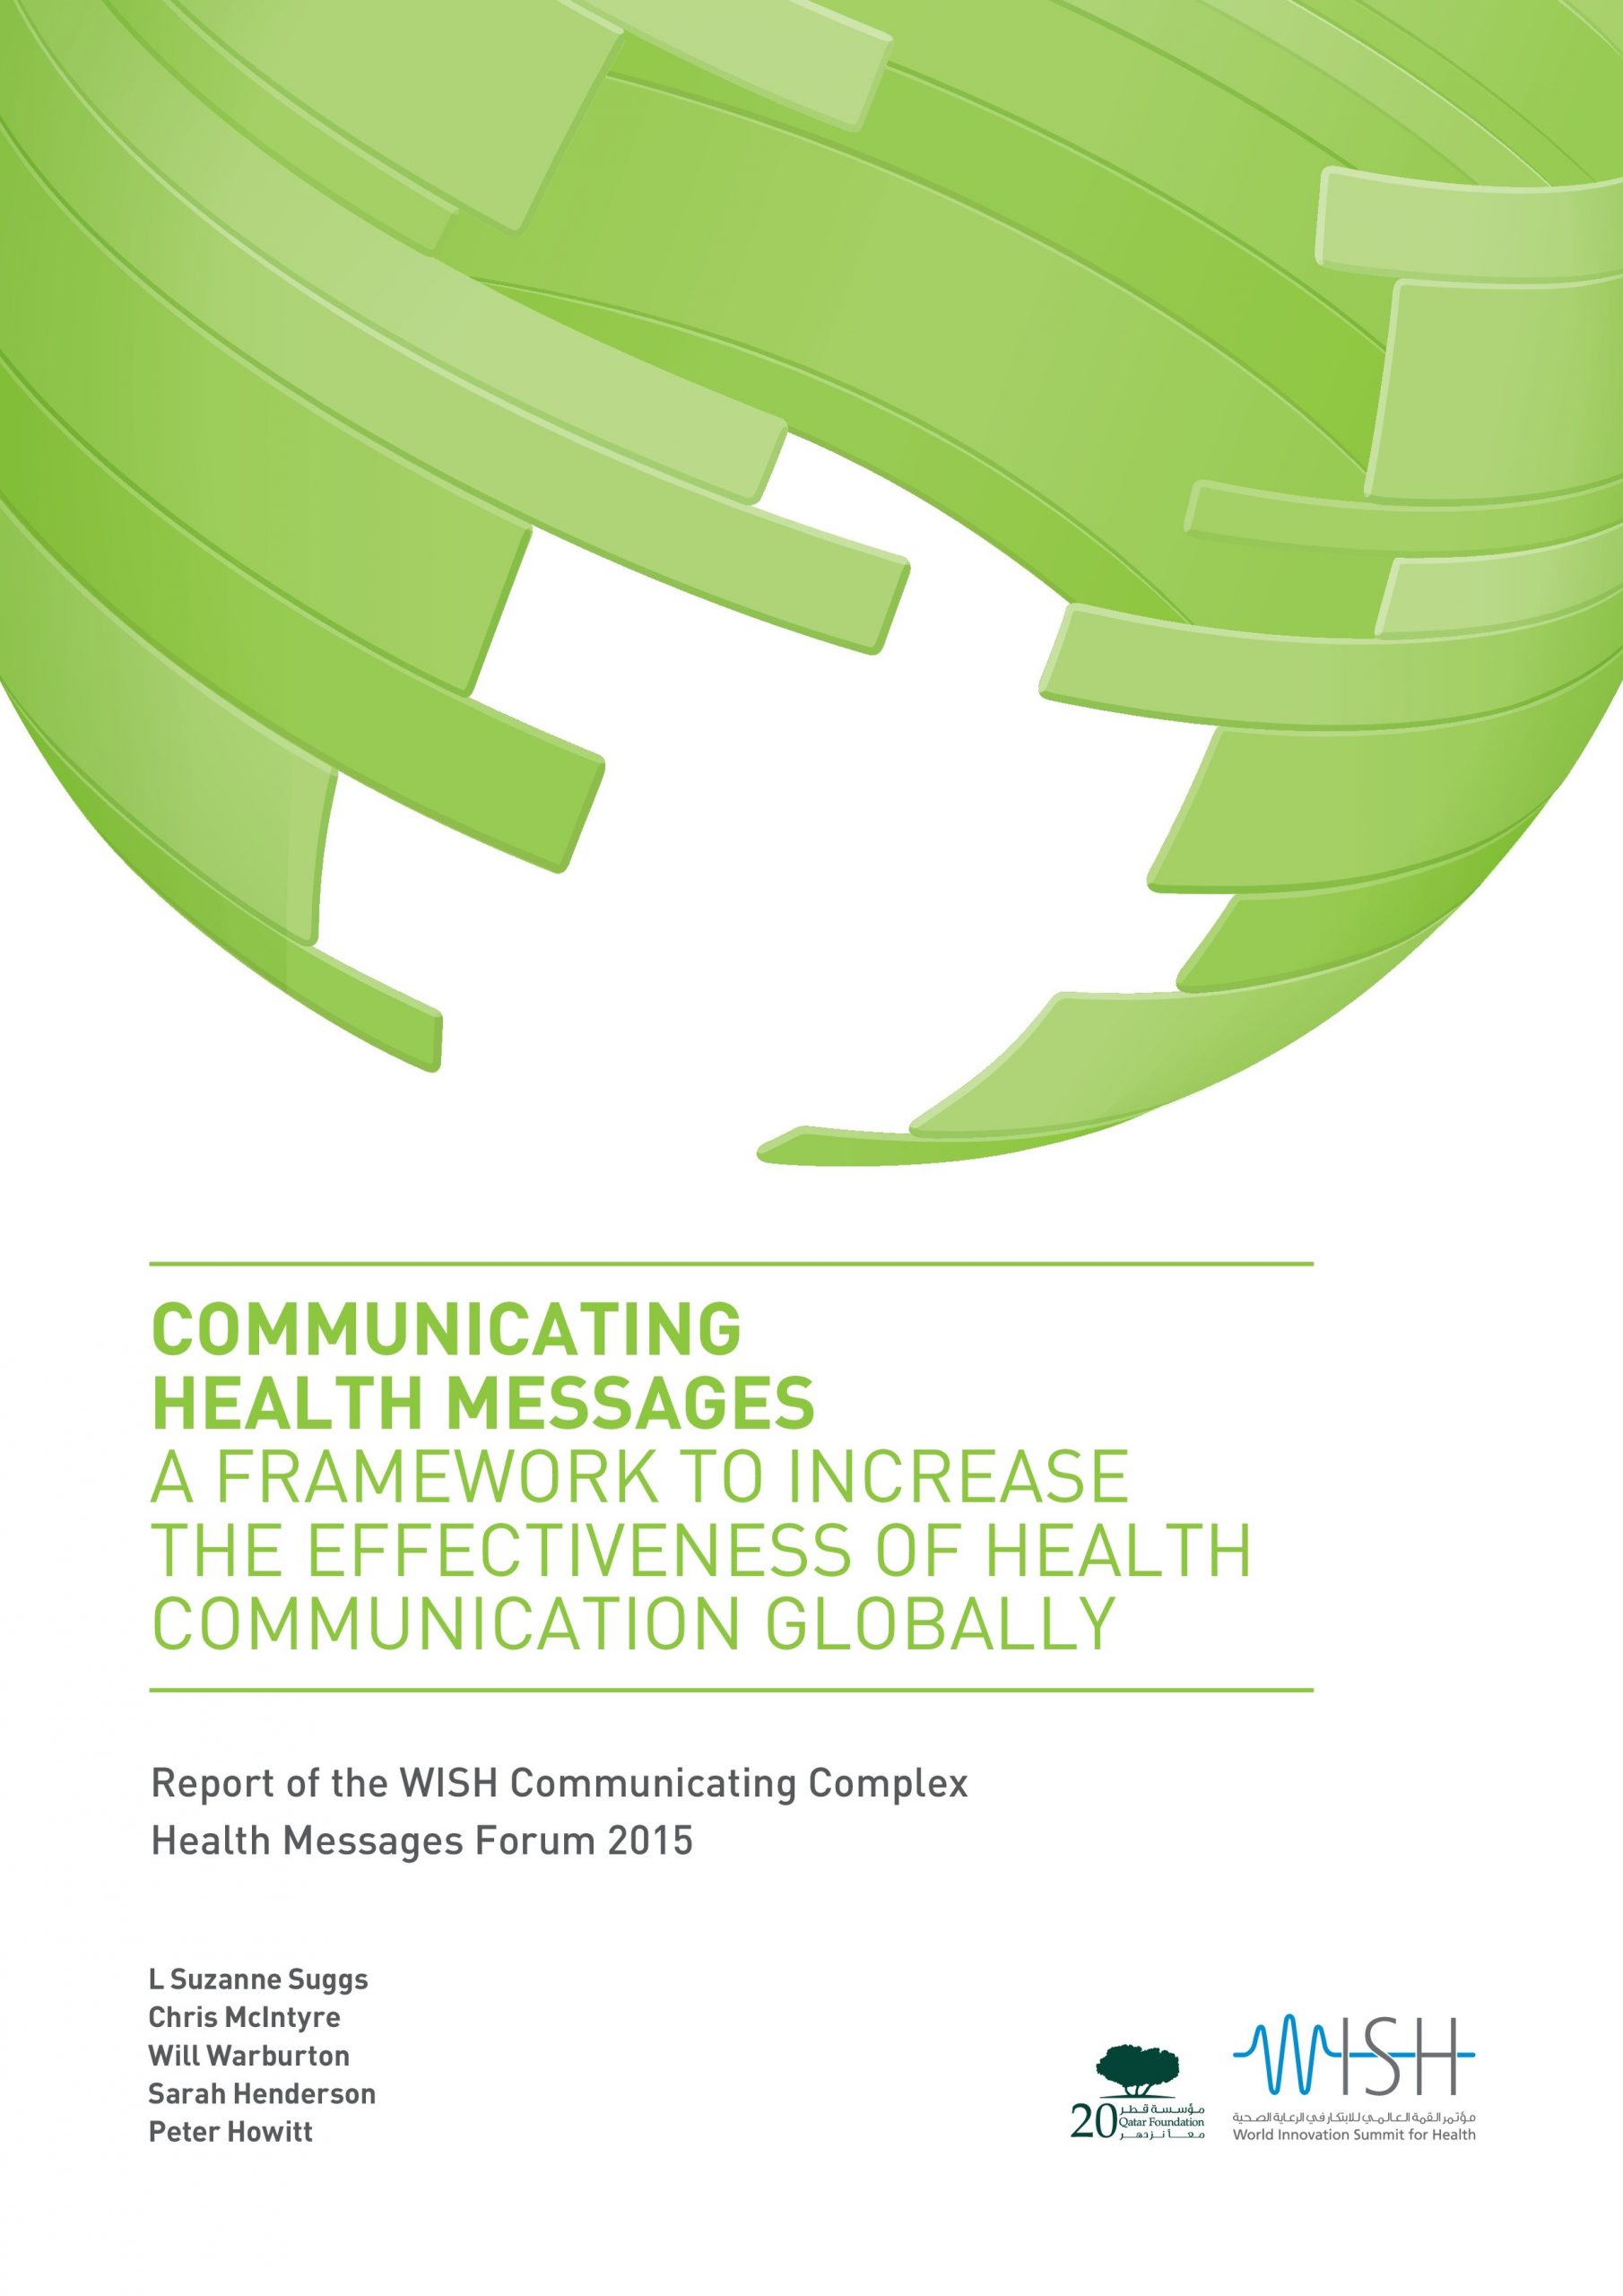 Communicating Health Messages: A Framework to Increase the Effectiveness of Health Communication Globally 